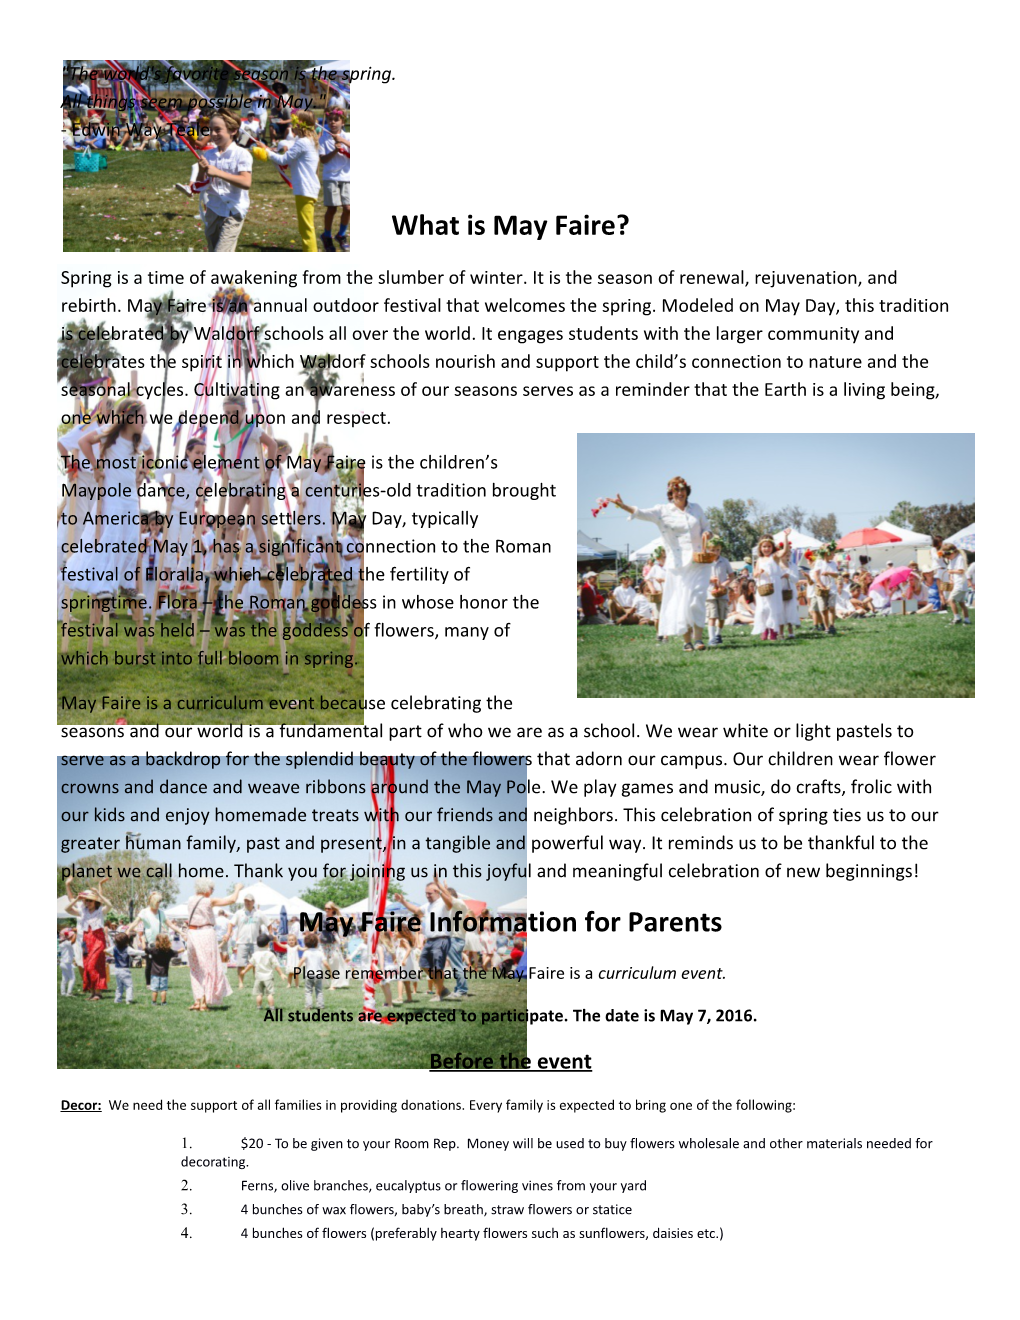 May Faire Information for Parents